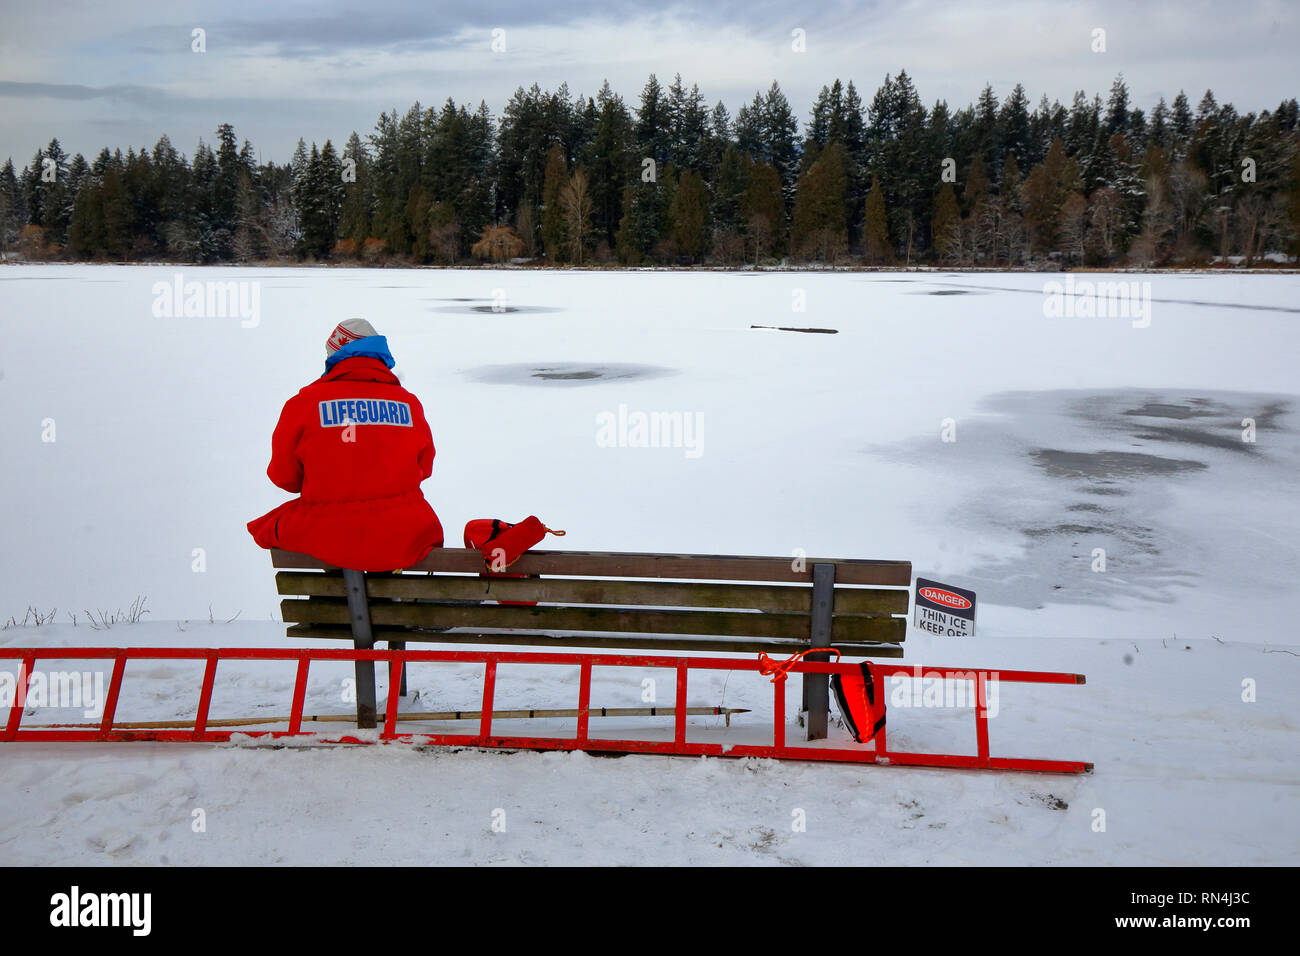 A Vancouver lifeguard keeps watch for people who may ignore posted thin ice signs at Lost Lagoon in Stanley Park, Vancouver, BC. (February 11, 2019) Stock Photo